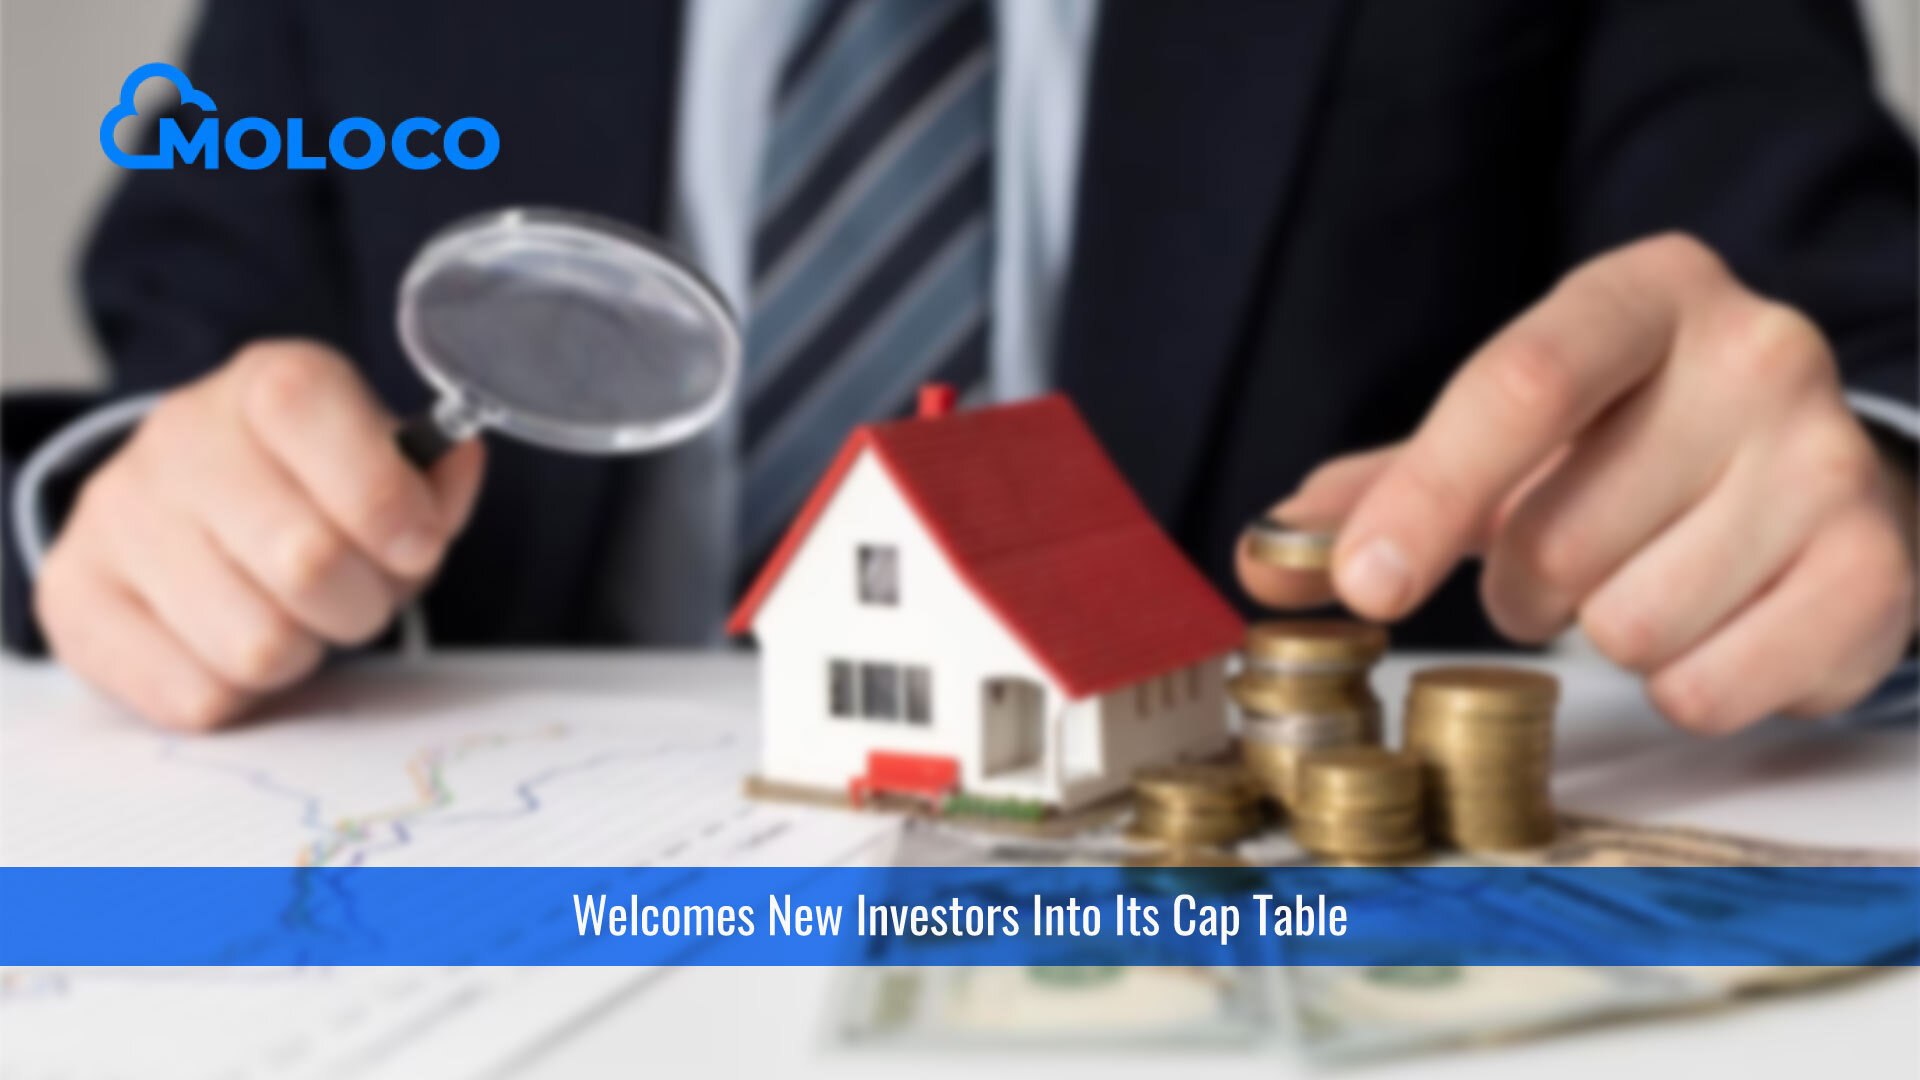 Moloco Welcomes New Investors Into Its Cap Table